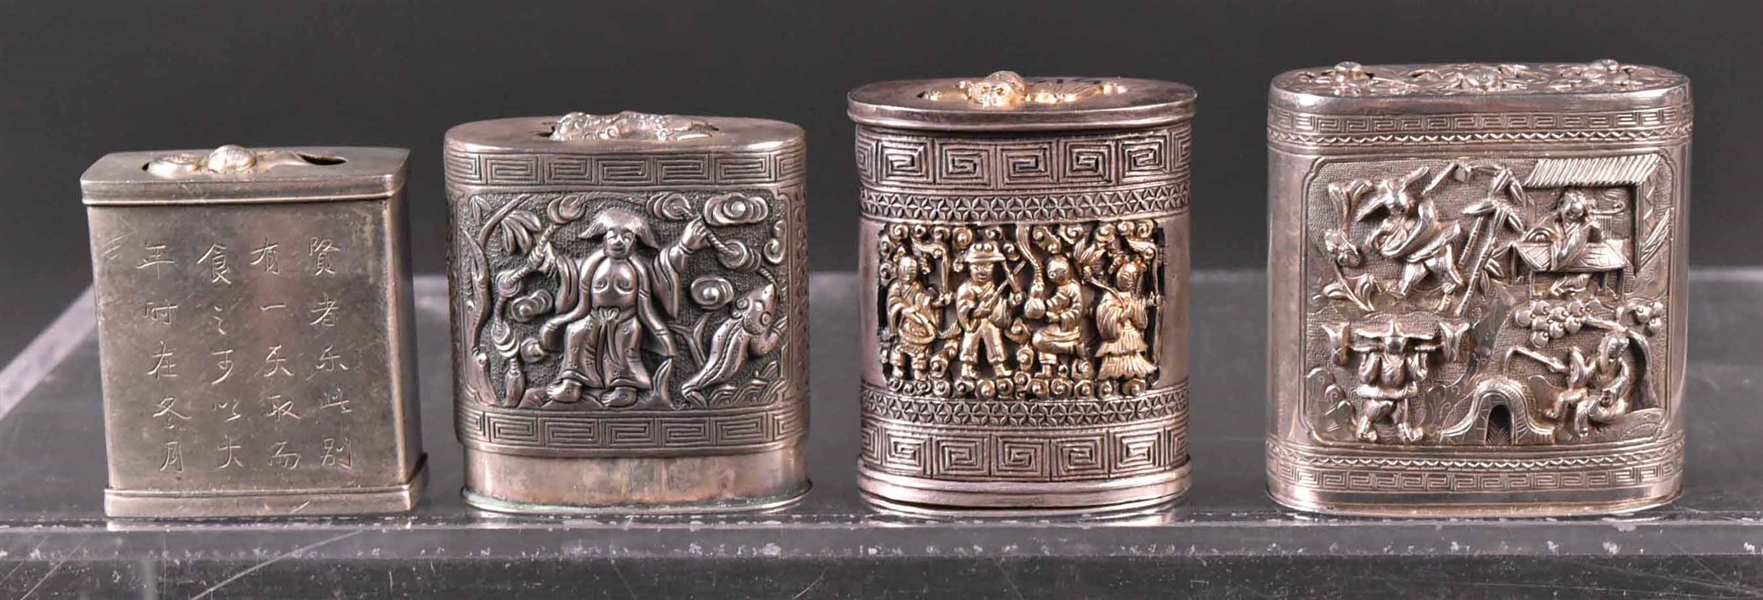 Four Chinese Export Silver Opium Boxes